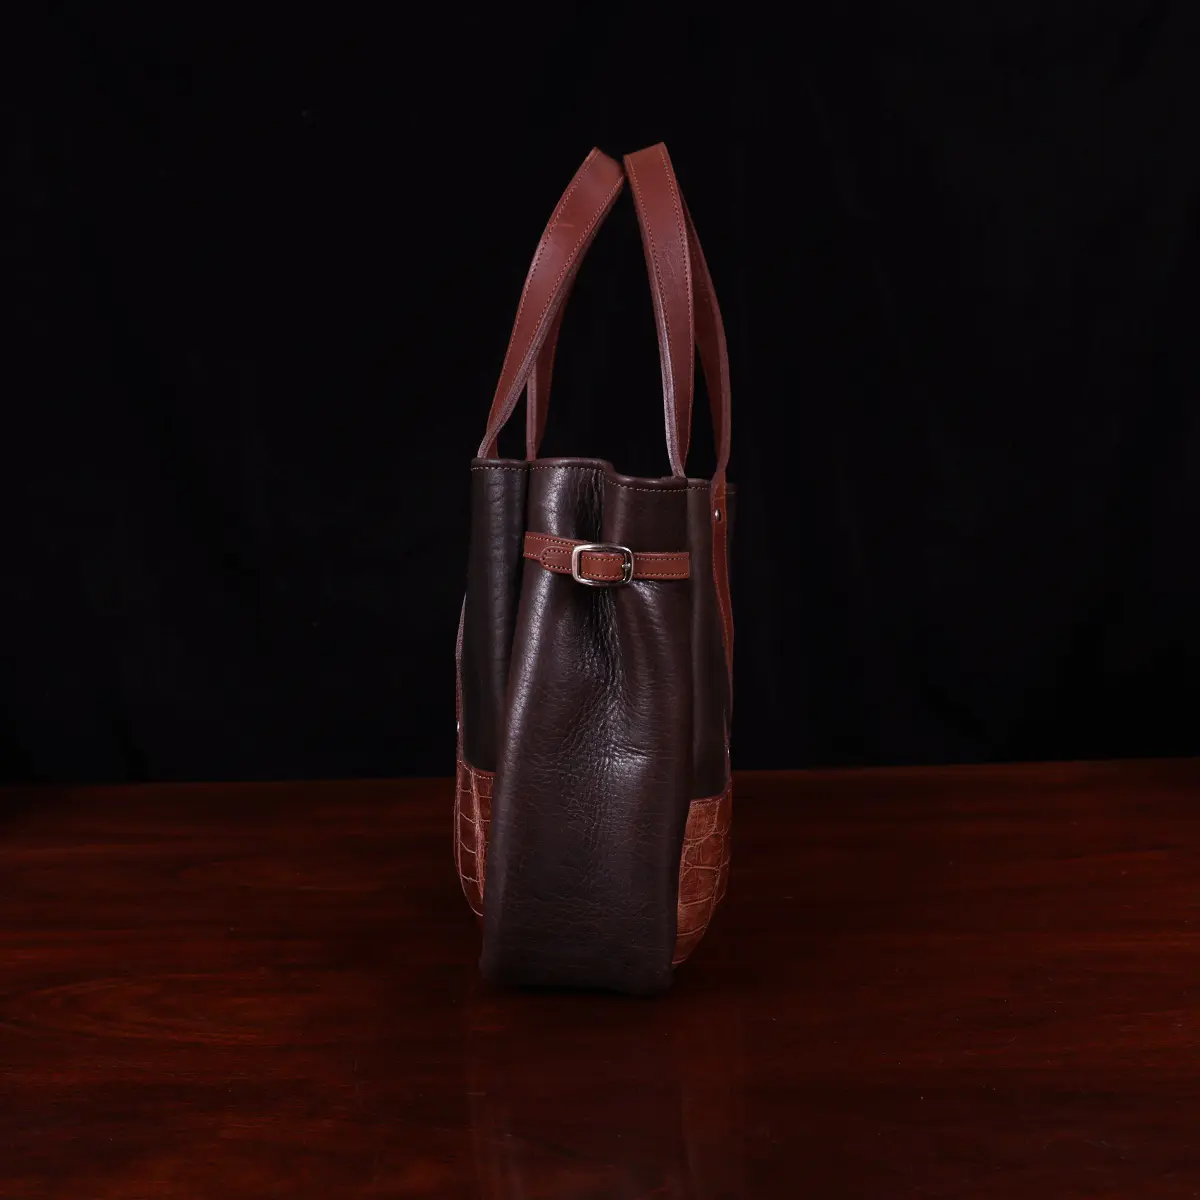 Leather Bentley Tote in dark Tobacco Brown American Buffalo trimmed with American Alligator and Vintage Brown Steerhide - side View on black background